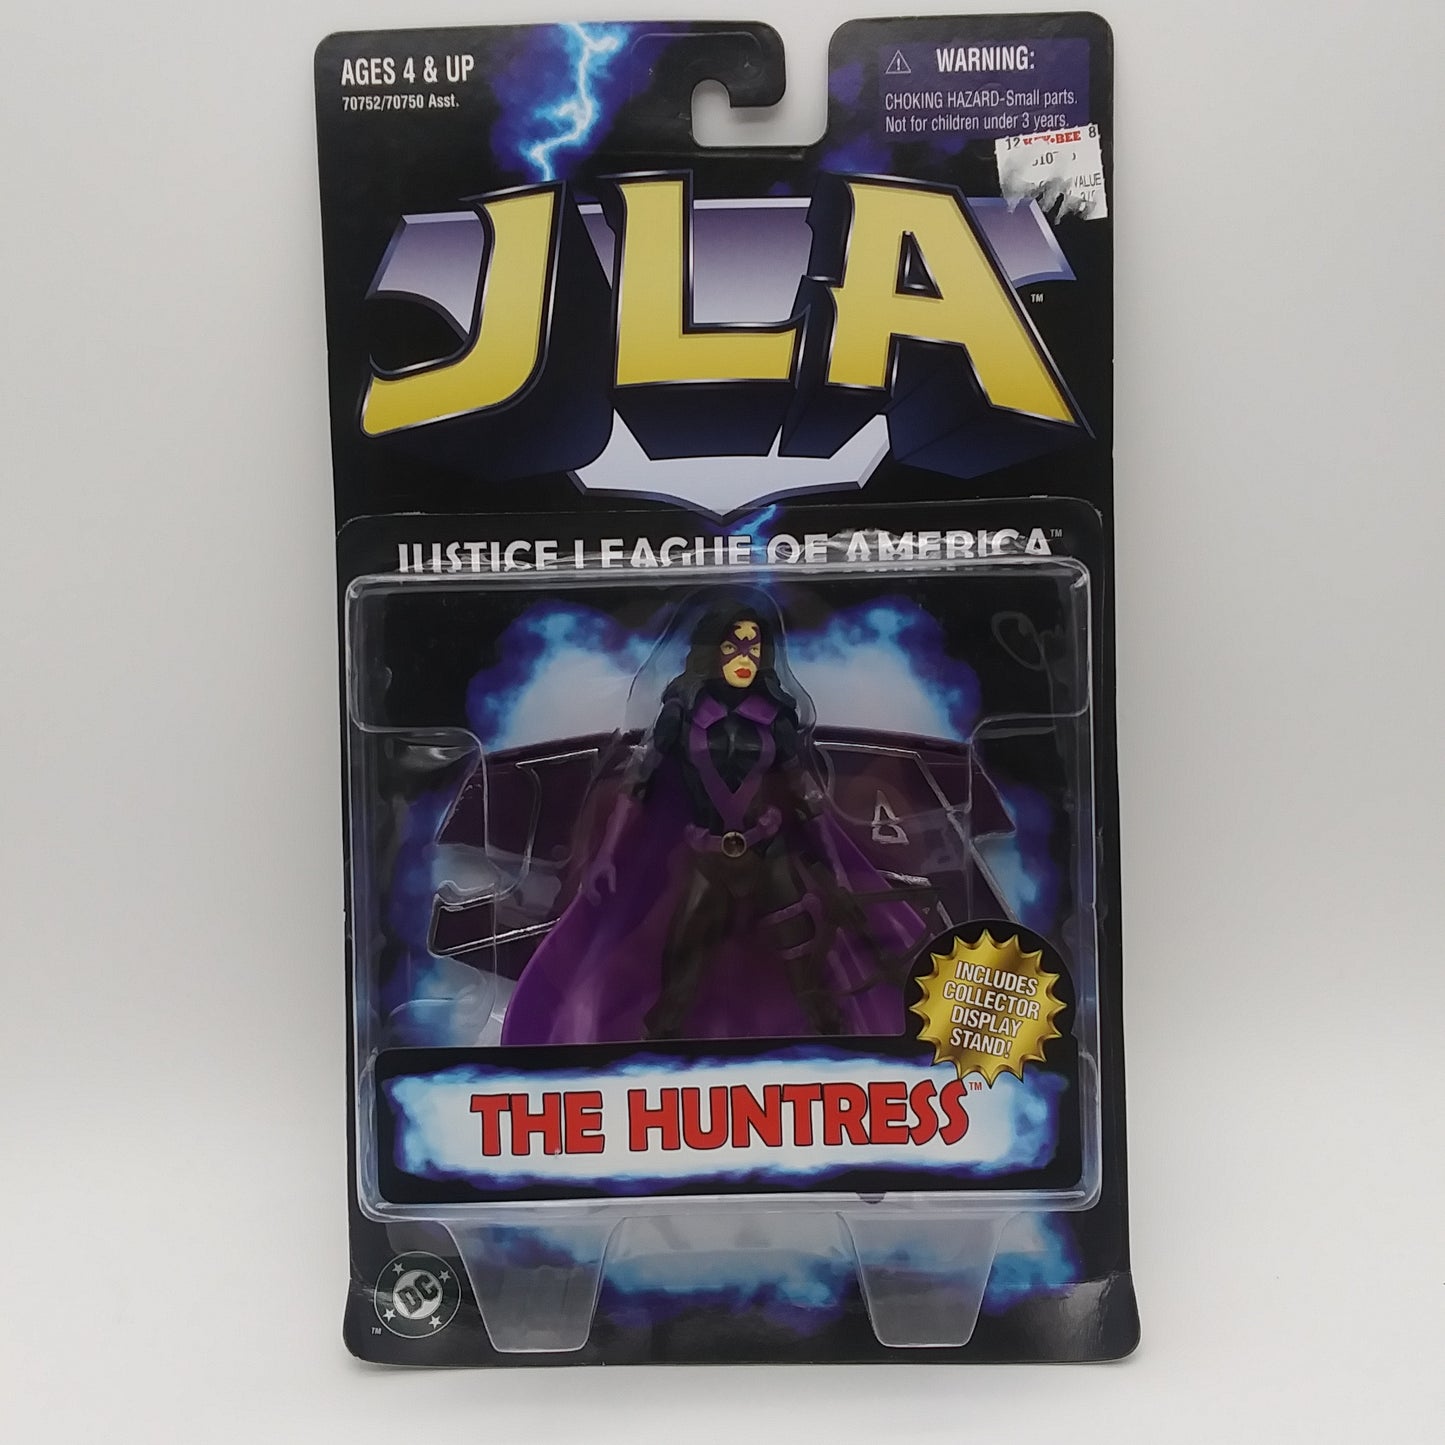 The front of the box and bubble. The bubble is sealed, the action figure inside is a white woman wearing a black jumpsuit with a purple cape and purple highlights.